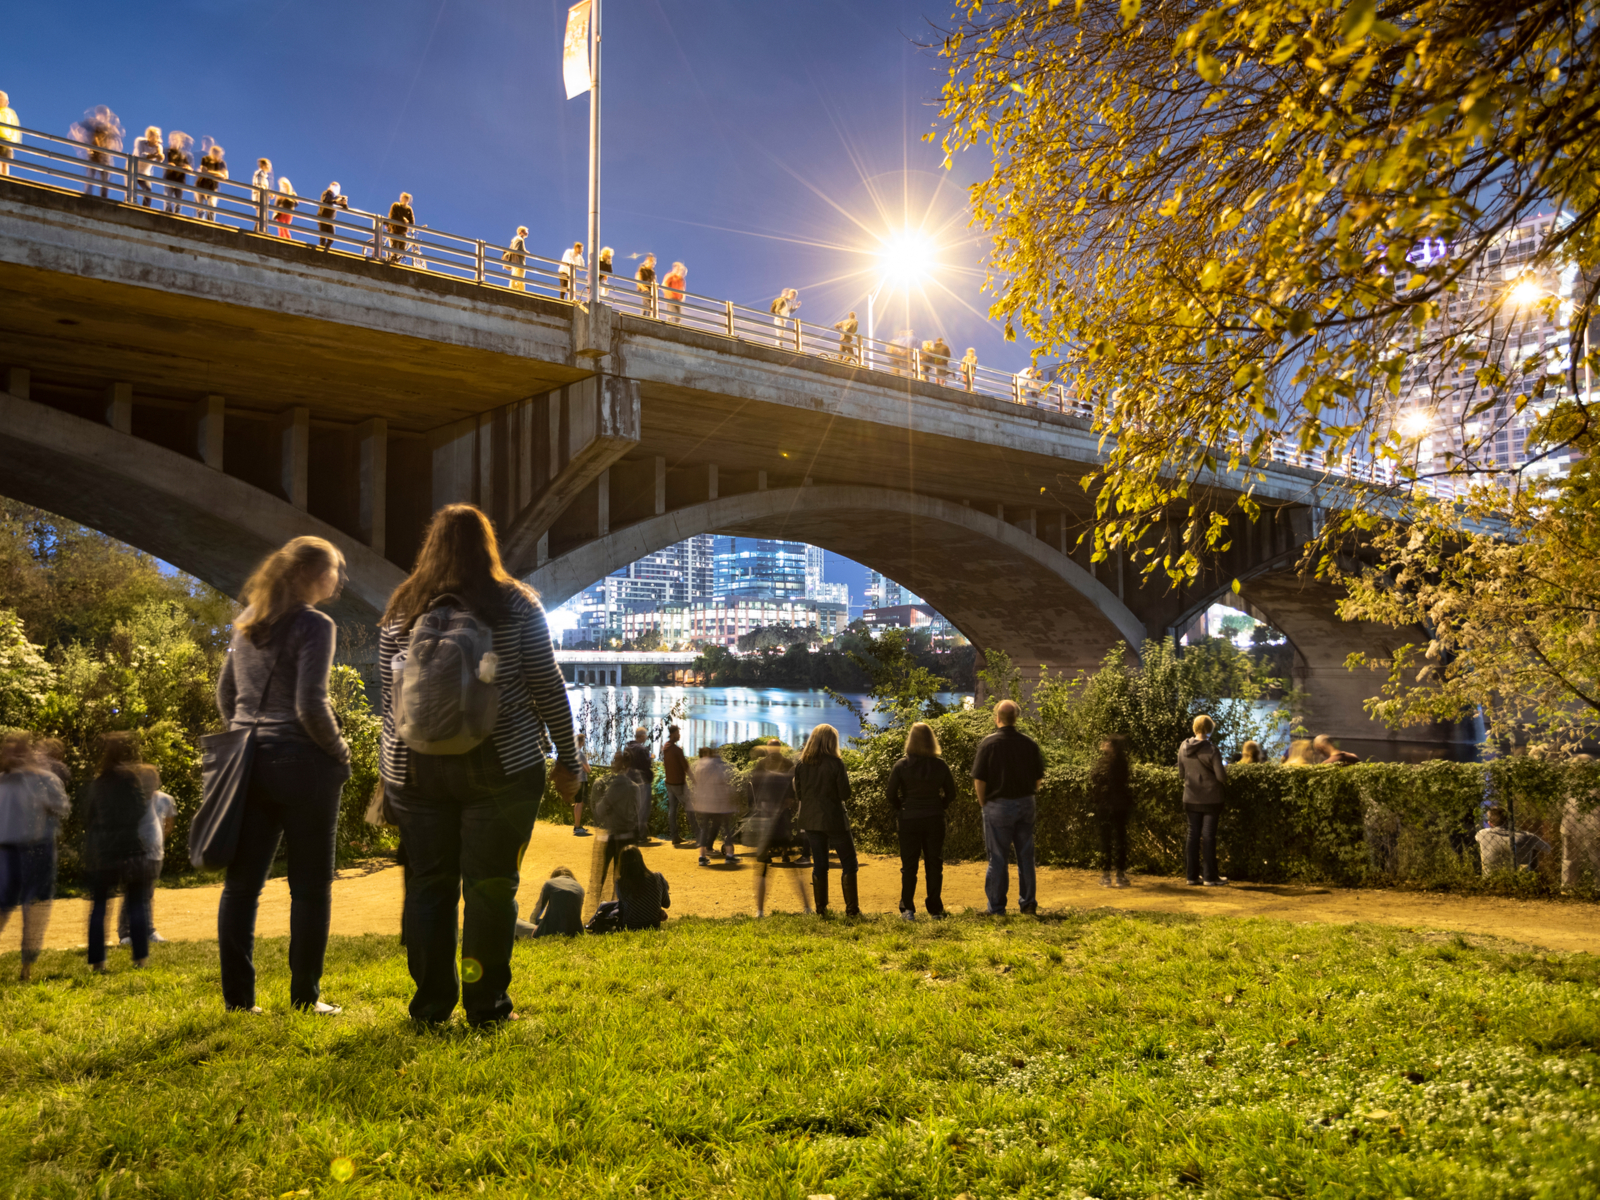 People in Austin waiting for the Congress Bridge Bats, one of the best things to do in Texas